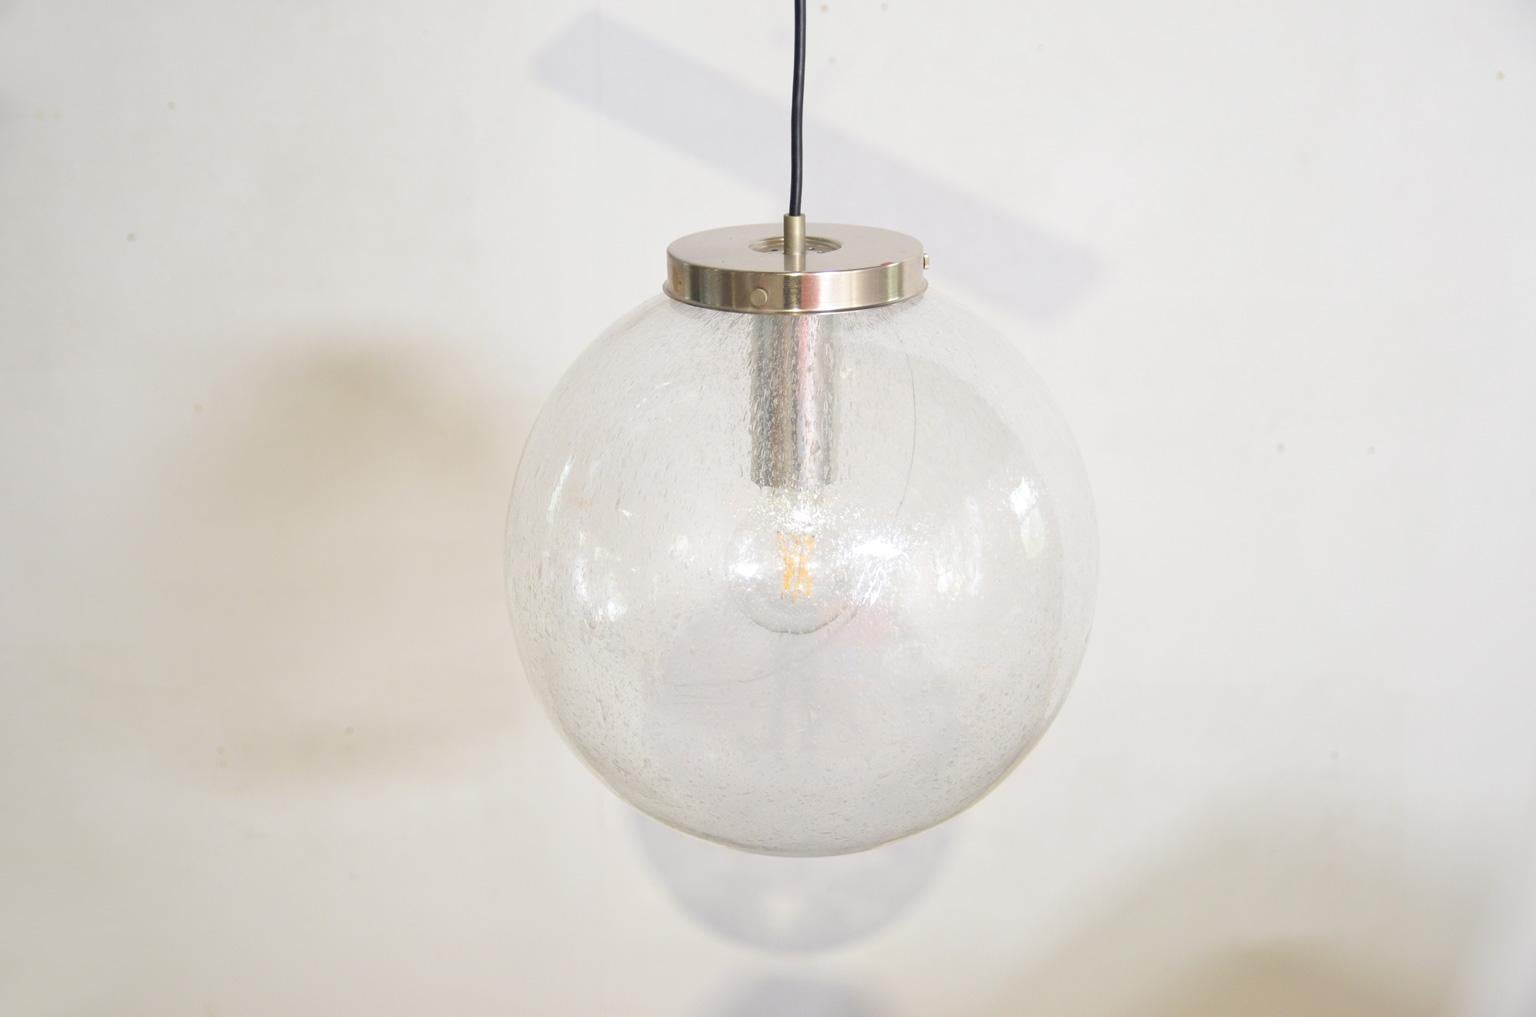 The 40 cm diameter hand blown sphere spreads a beautiful shimmering light due to the structure of the hand blown glass. The lamp is labeled with a Doria sticker and numbered (1283). The lamp uses an E27 bulb, maximum 60 watt.